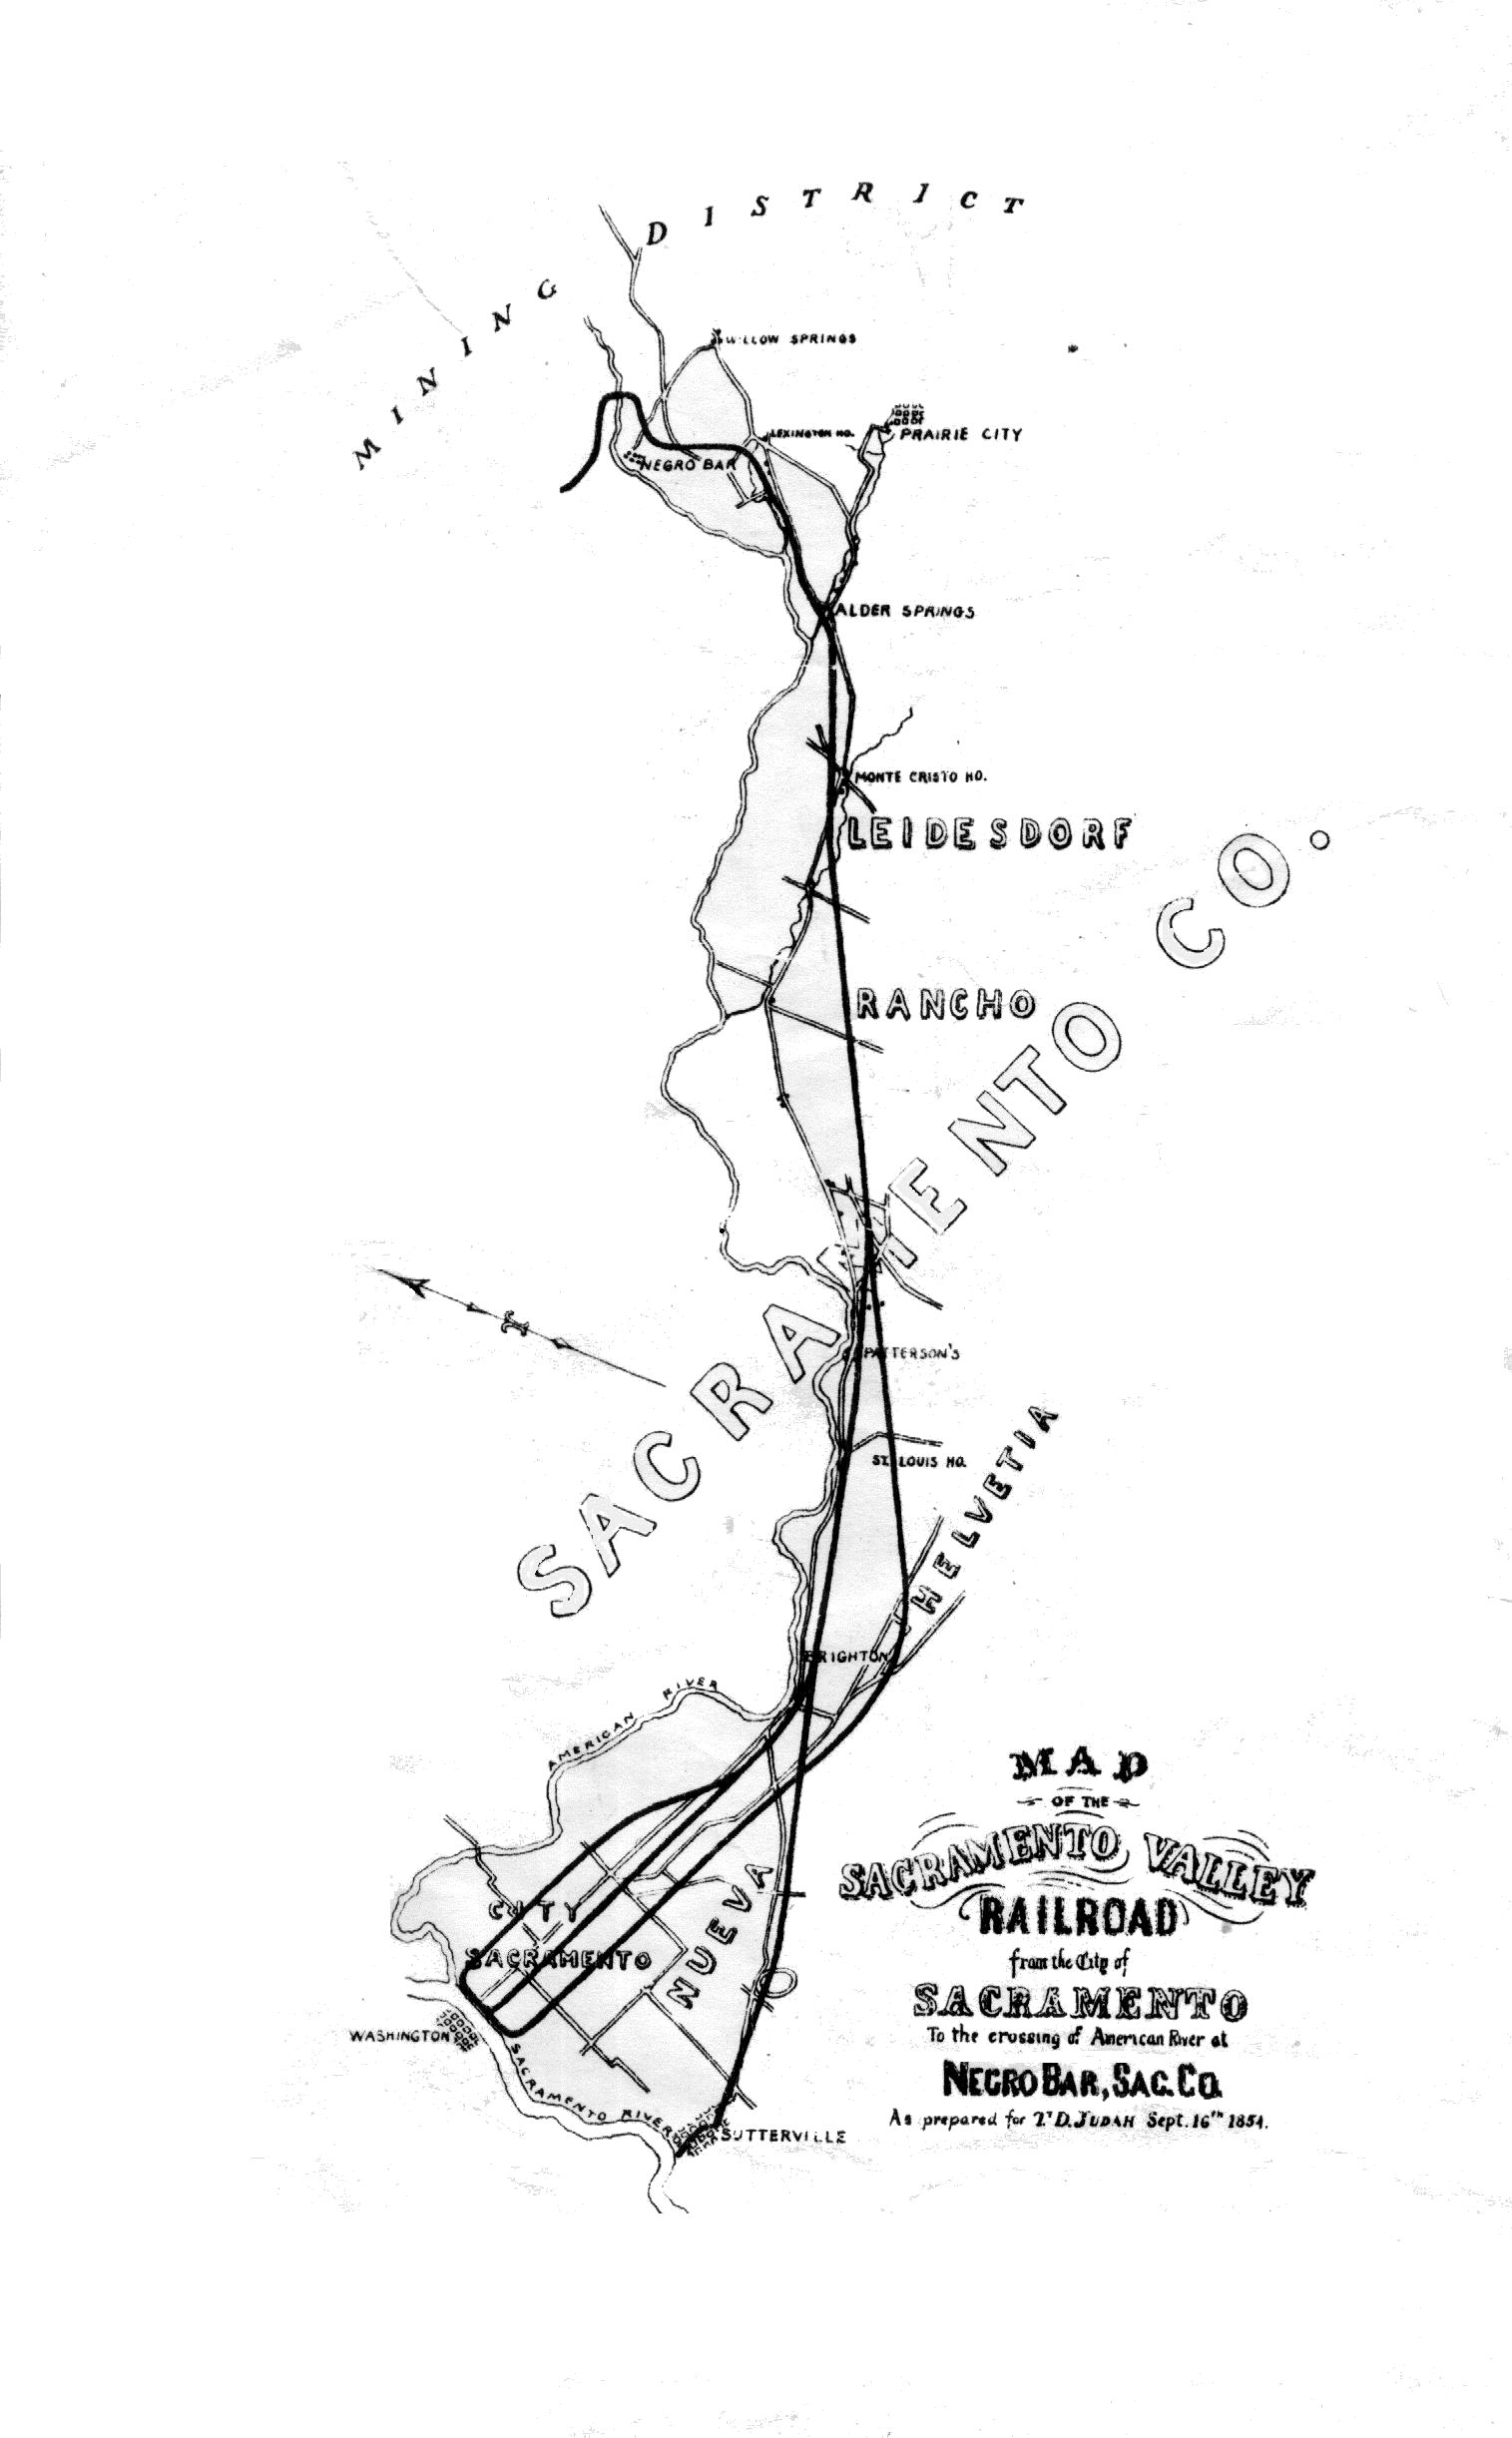 Judah's  Map of the SVRR Railroad